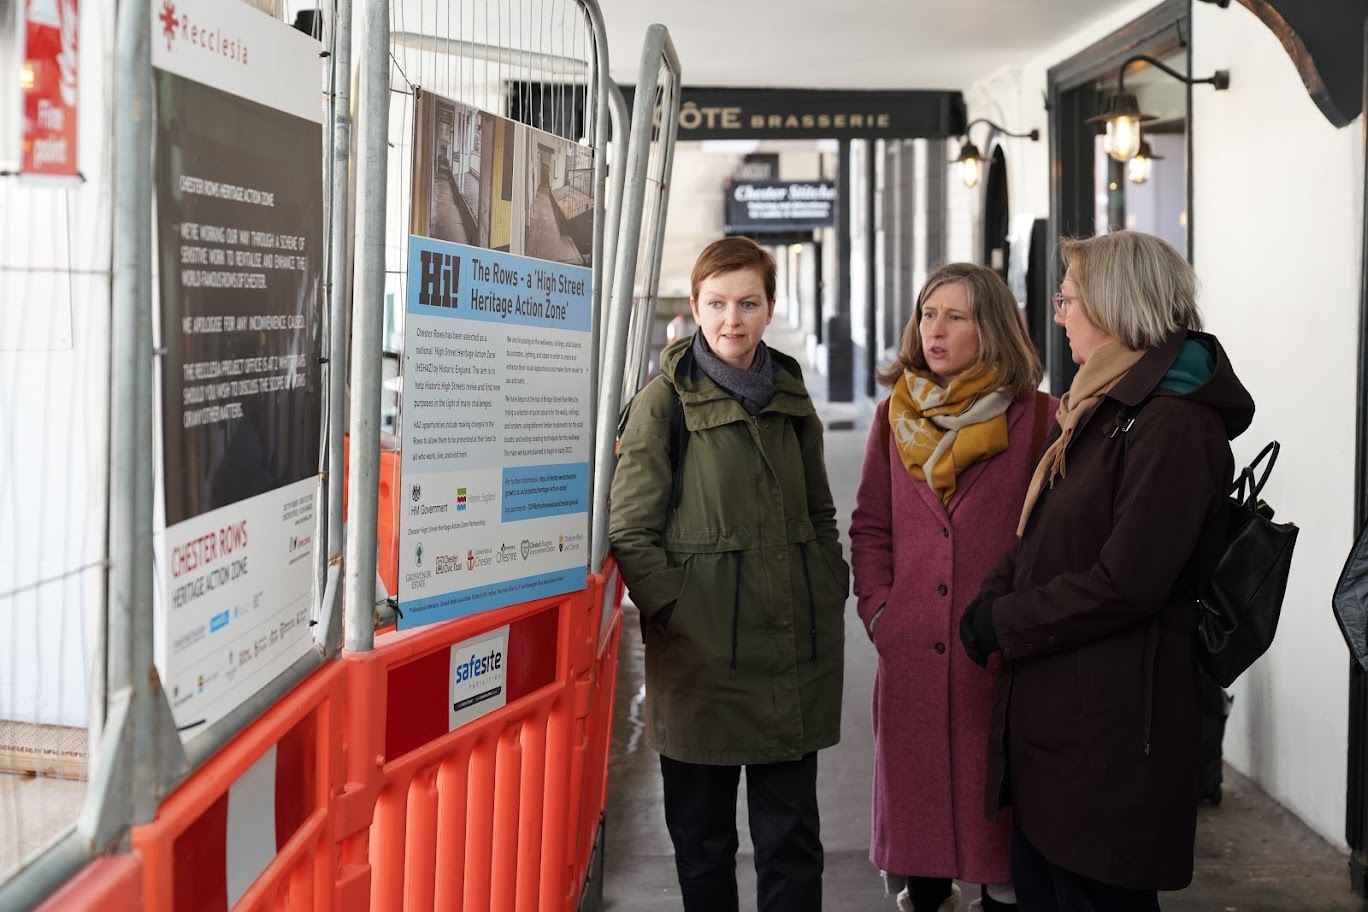 Pippa Brown (Historic Places Adviser, Historic England), Marie Smallwood (Head of Advice North, Historic England) and Samantha Dixon (MP, City of Chester) reading the interpretive boards that explain the work being done to improve the Chester Rows.